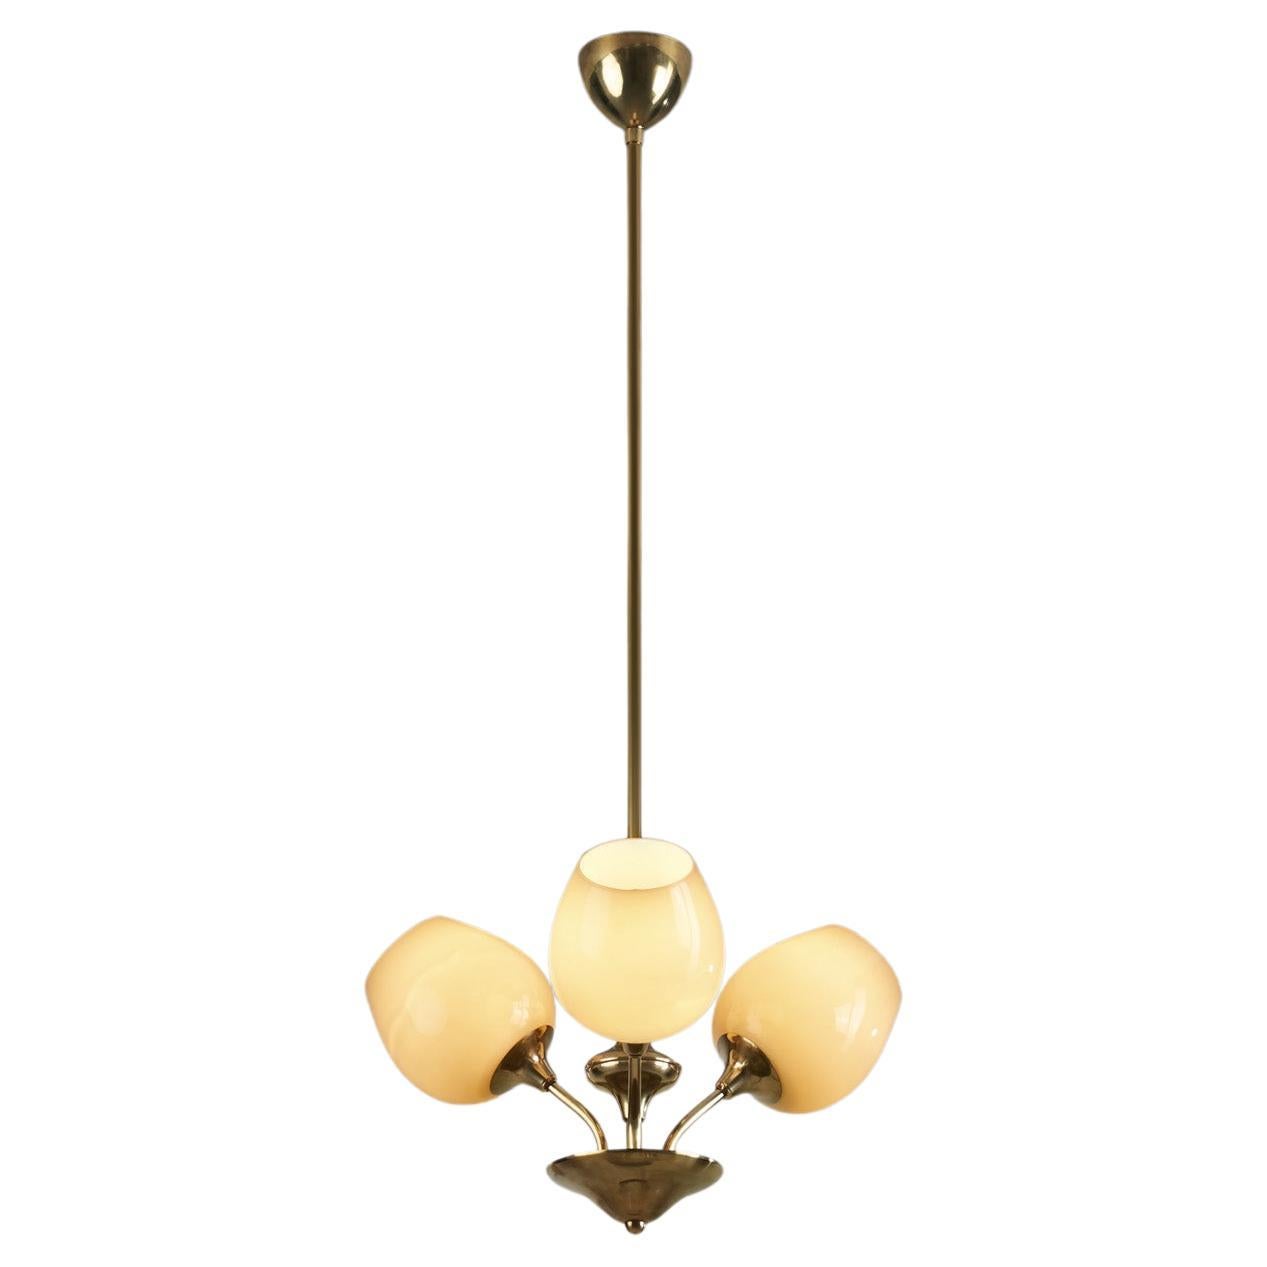 Brass Ceiling Lamp with Opal Shades by Itsu 'Attr.', Finland, ca 1950s